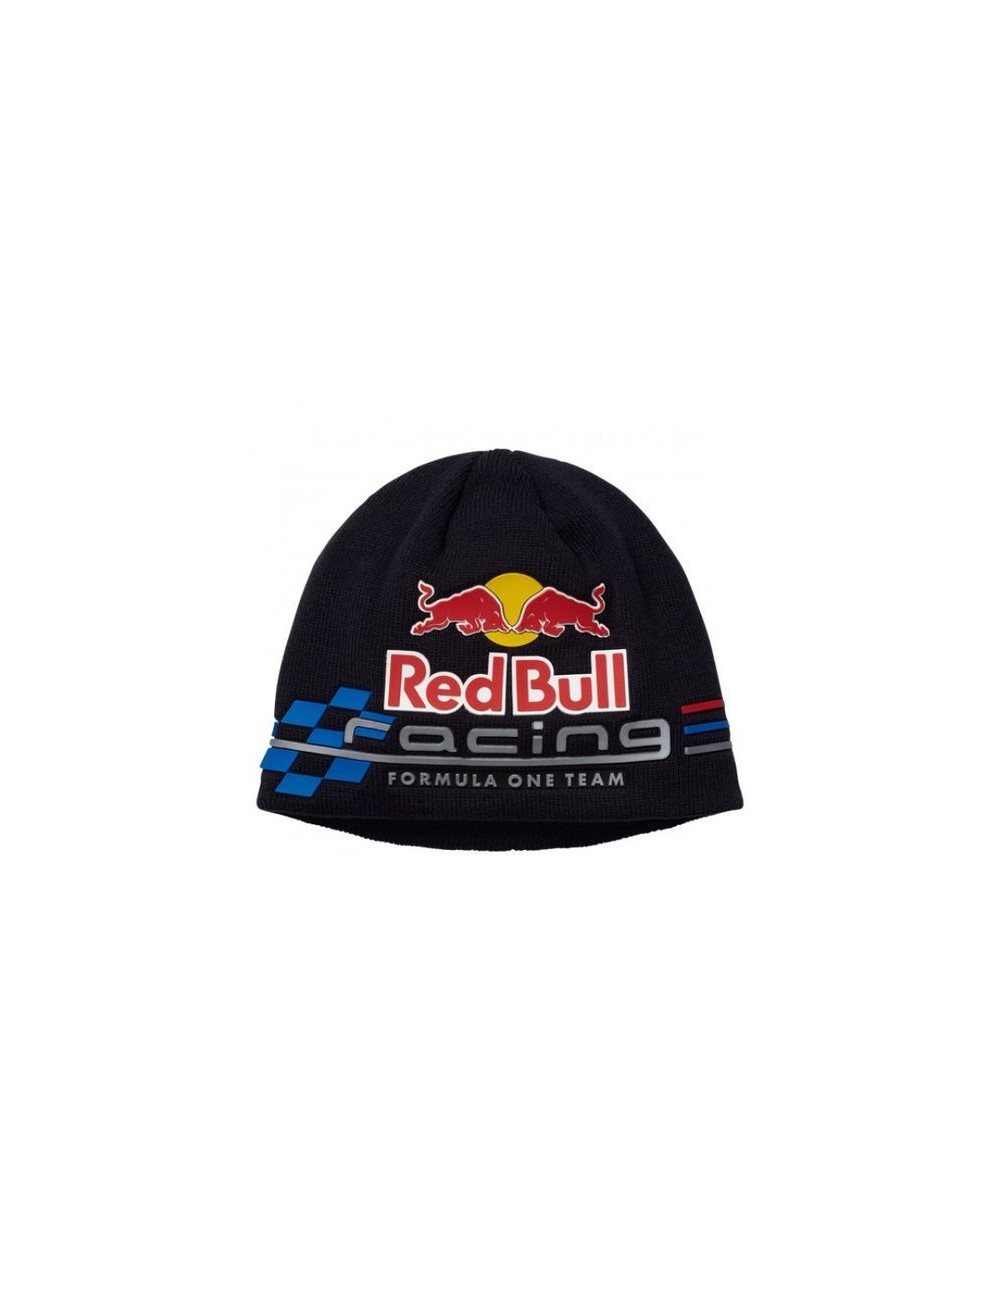 Bonnet Red Bull Racing Formula One by Pepe Jeans